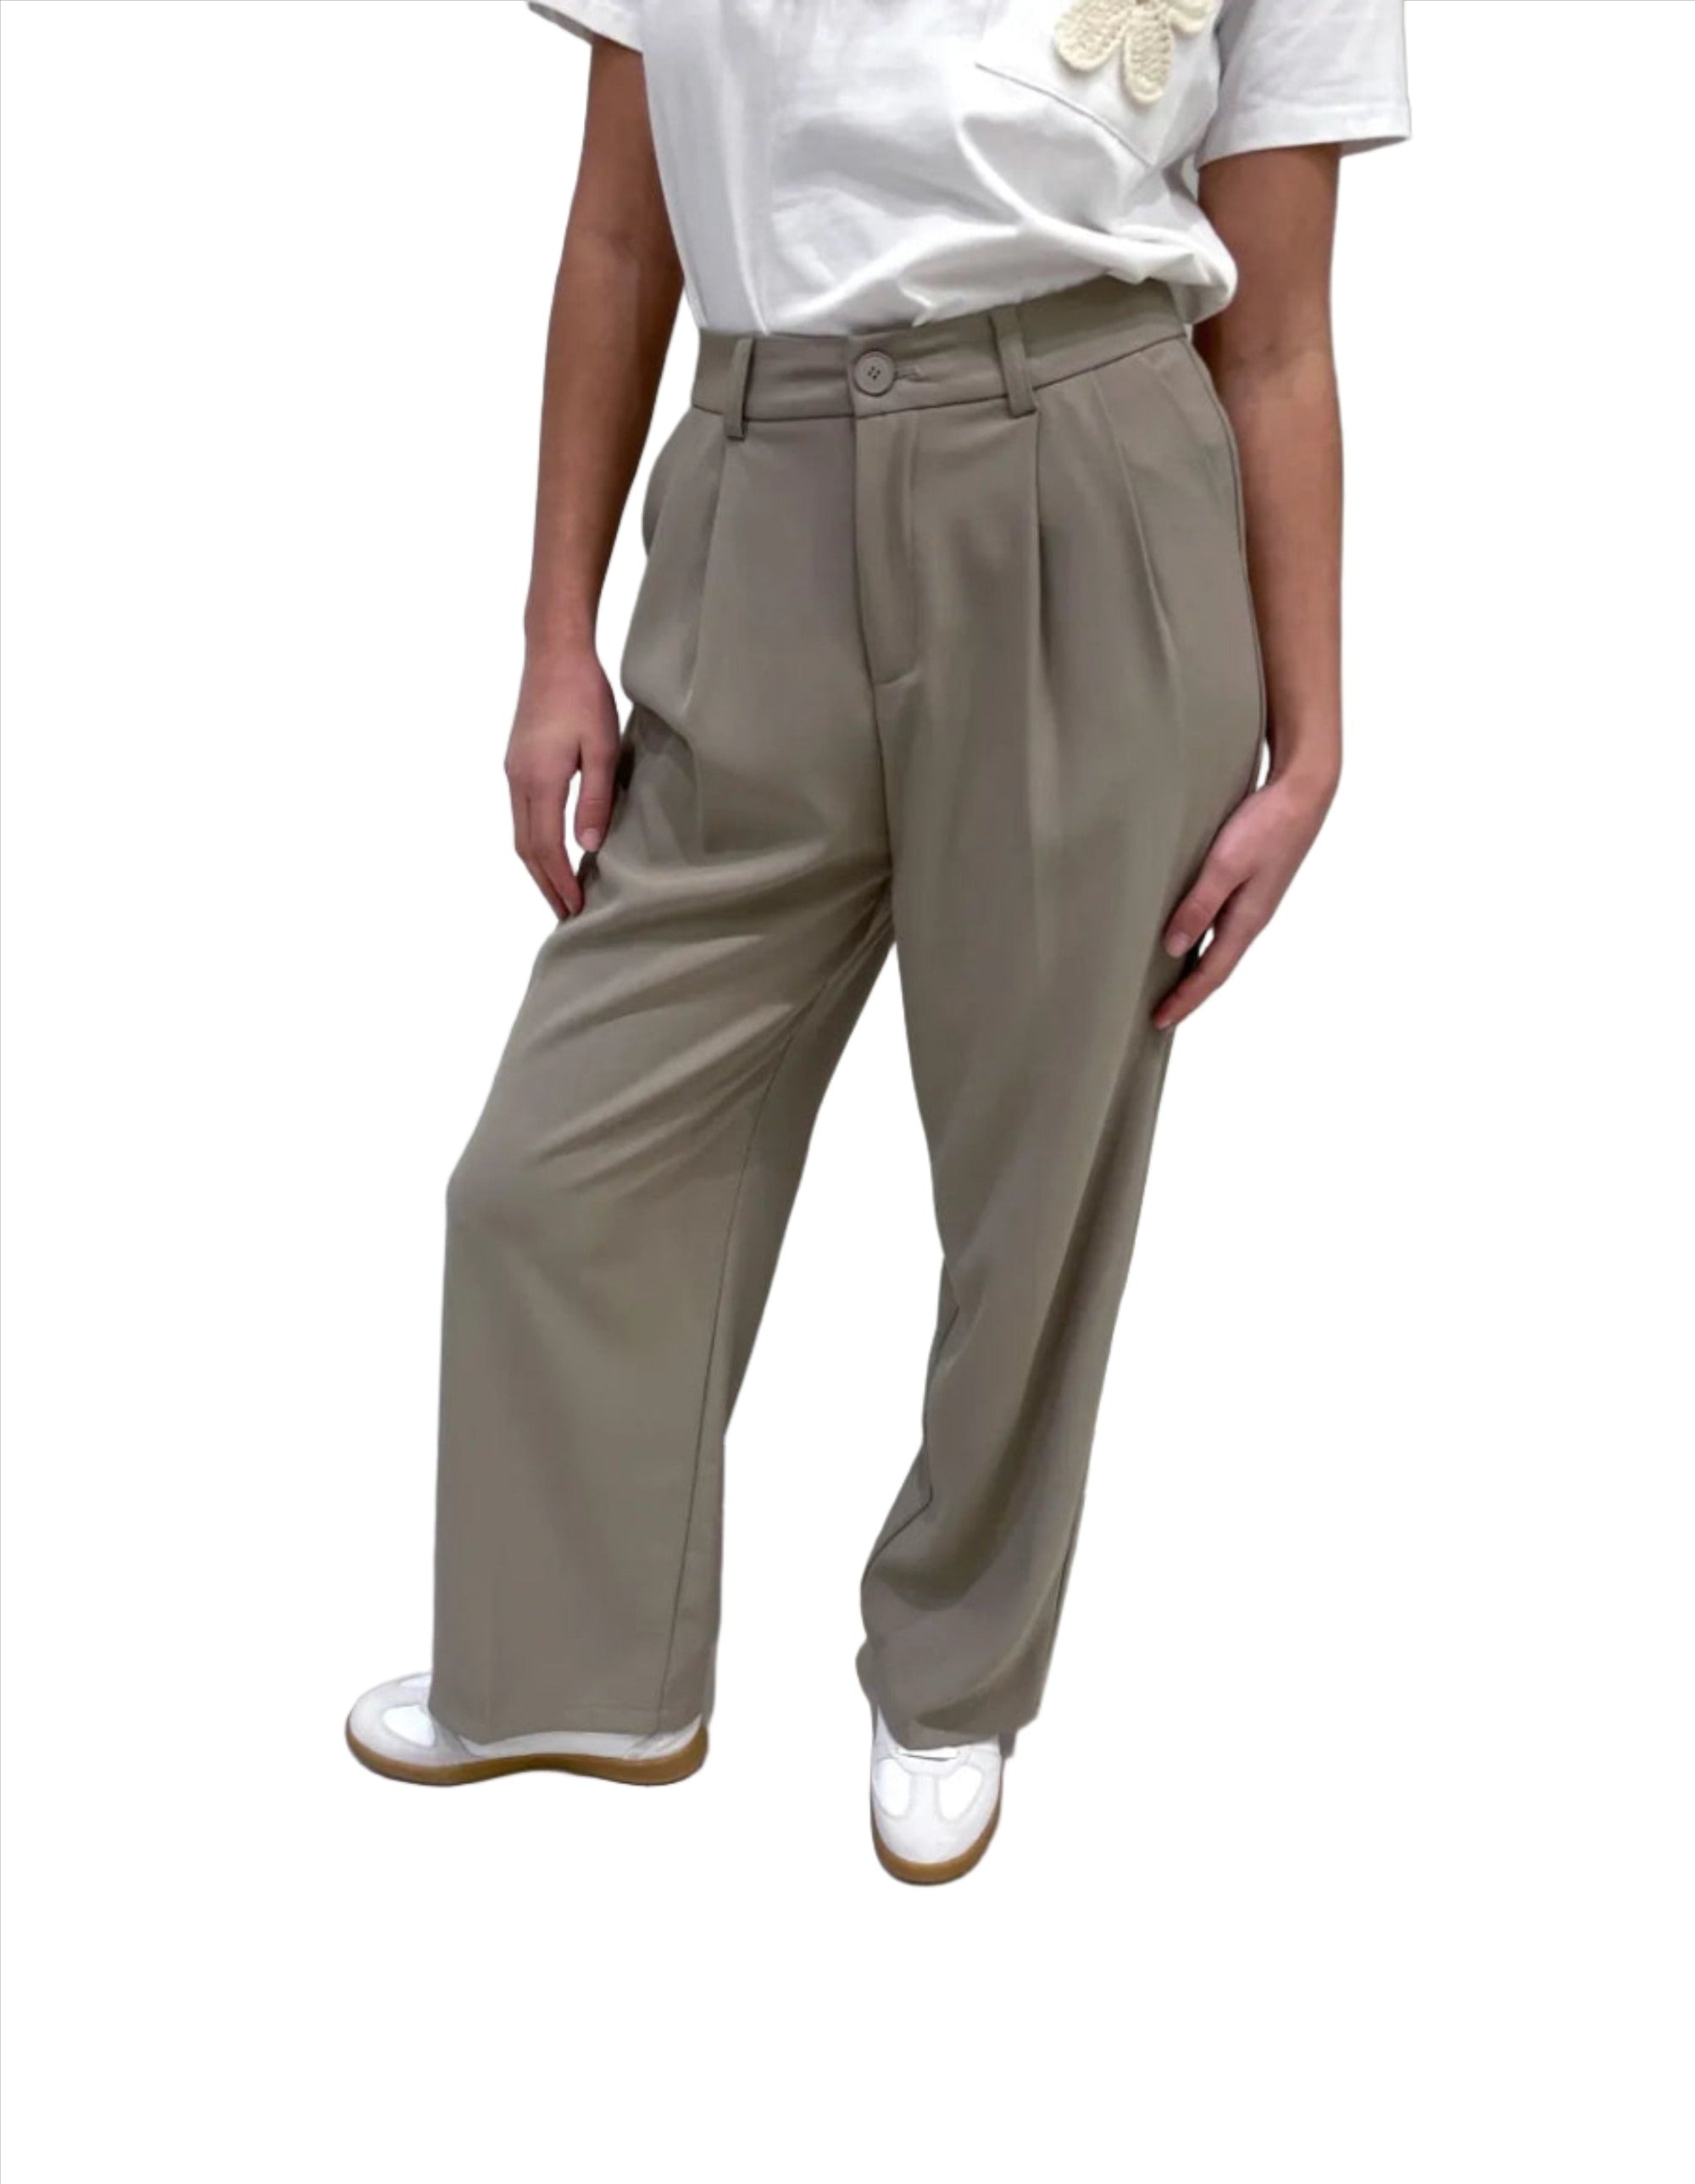 Clever Alice Taupe Trouser - clever alice